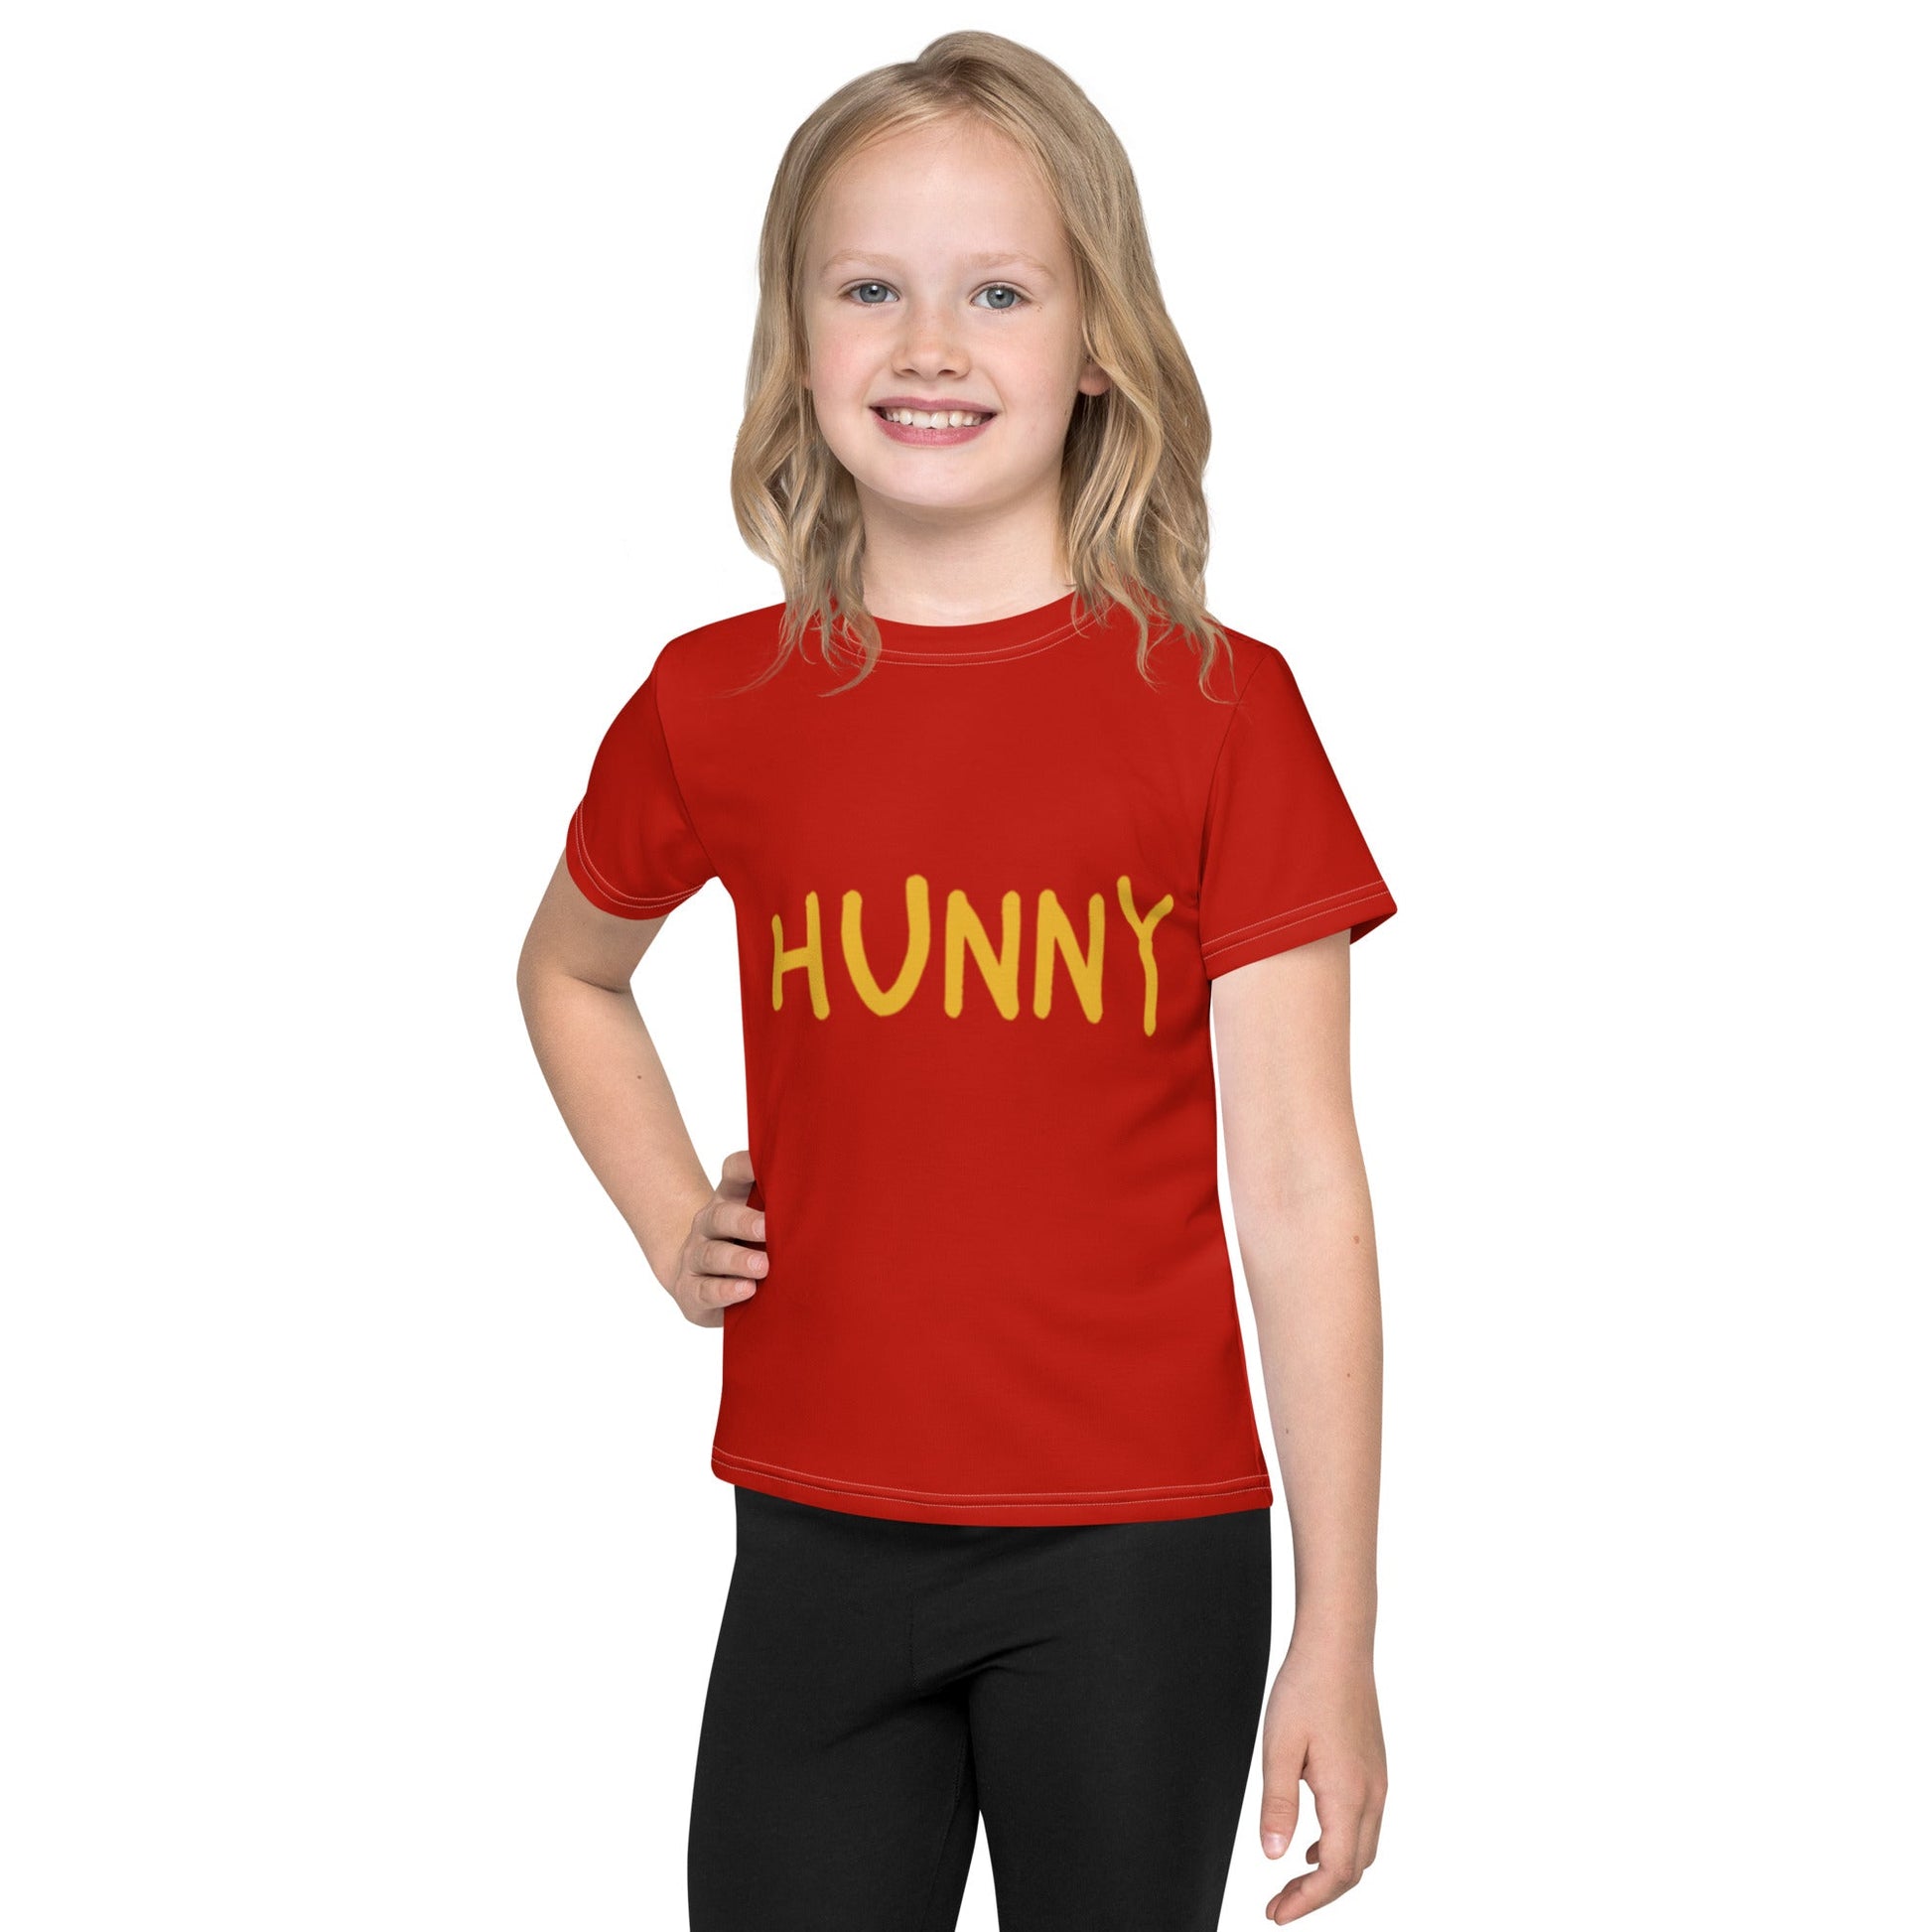 Hunny Bee Kids crew neck t-shirt happiness is addictive#tag4##tag5##tag6#